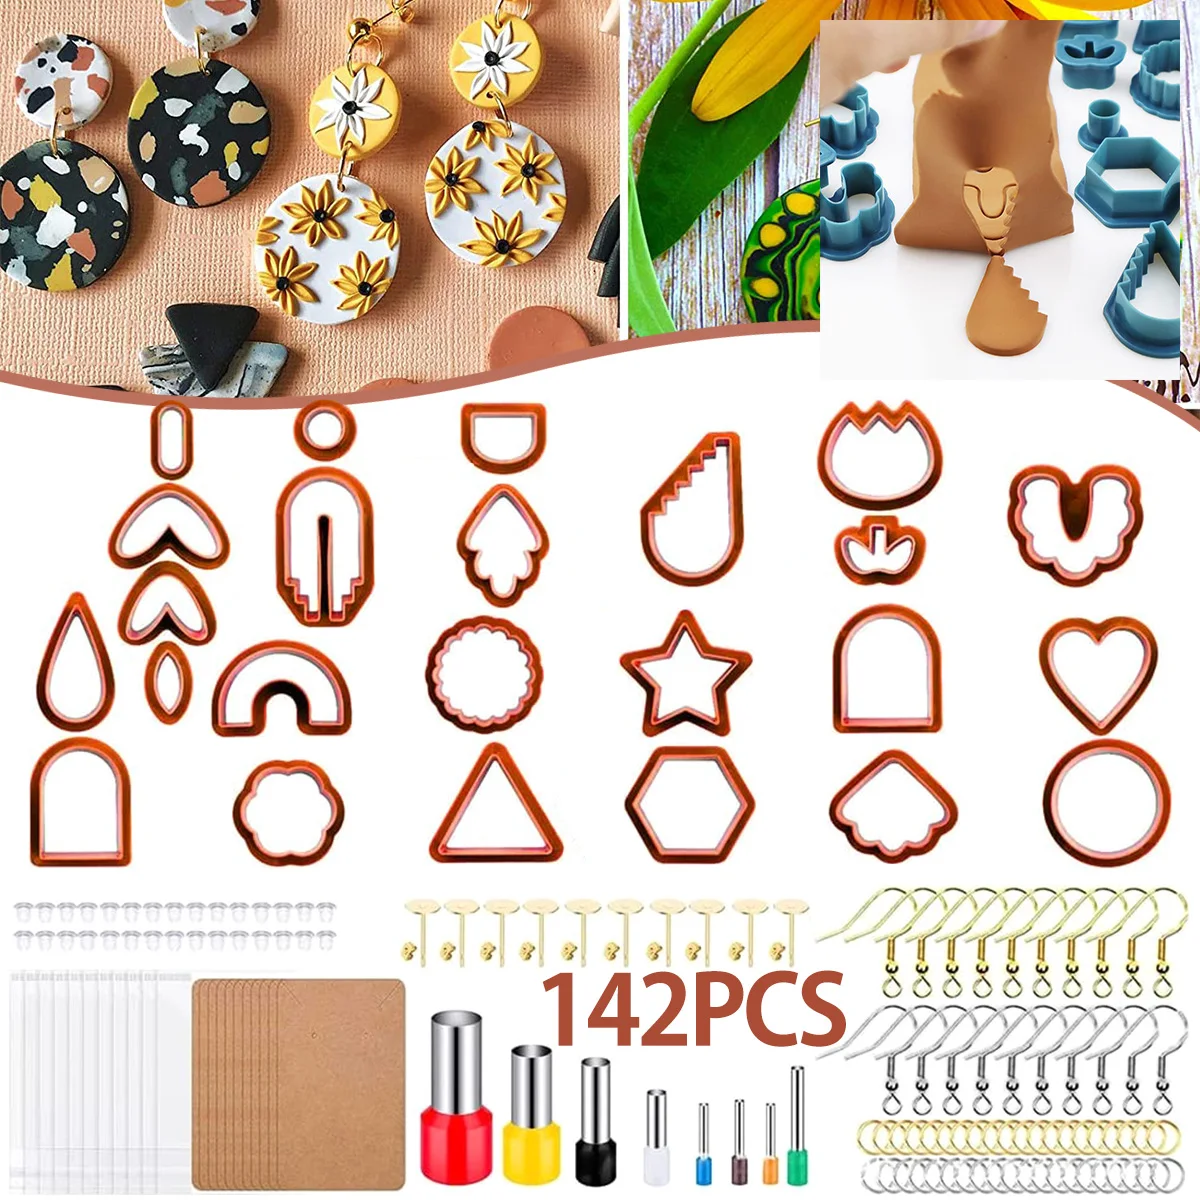 

142Pcs Clay Cutters Set Polymer Clay Cutters Set with 24 Shapes Stainless Steel Clay Earring Cutters with Earring Accessories